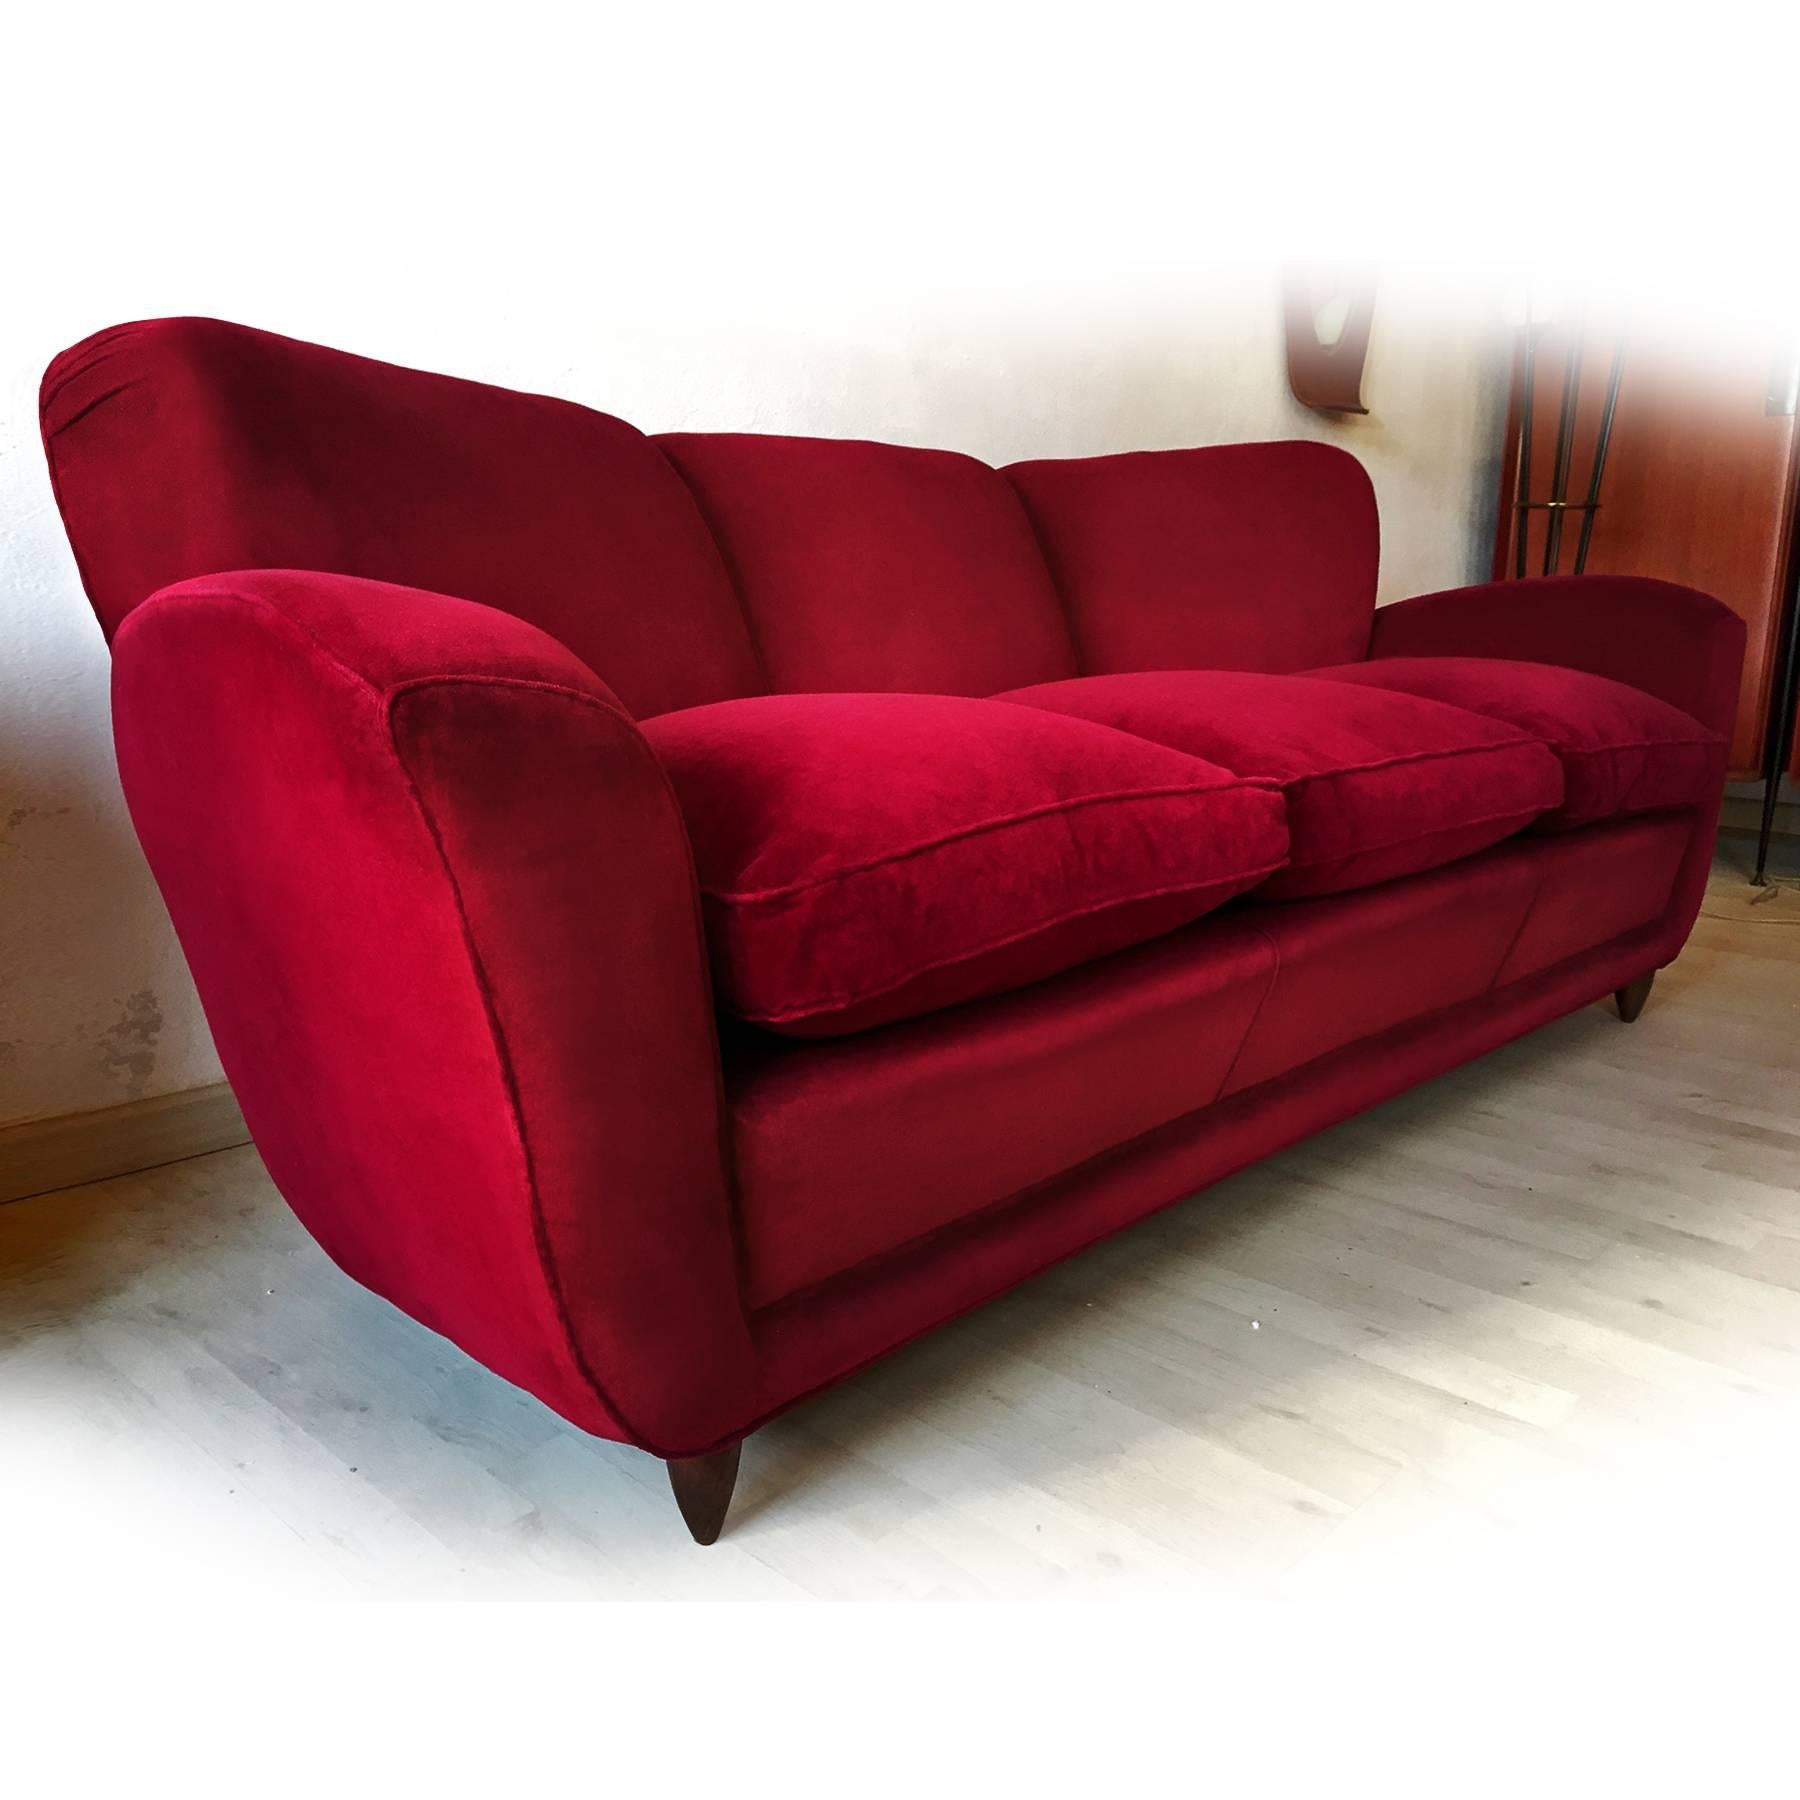 Mid-20th Century Italian large Sofa in red Velvet attributable to Guglielmo Ulrich, 1950s